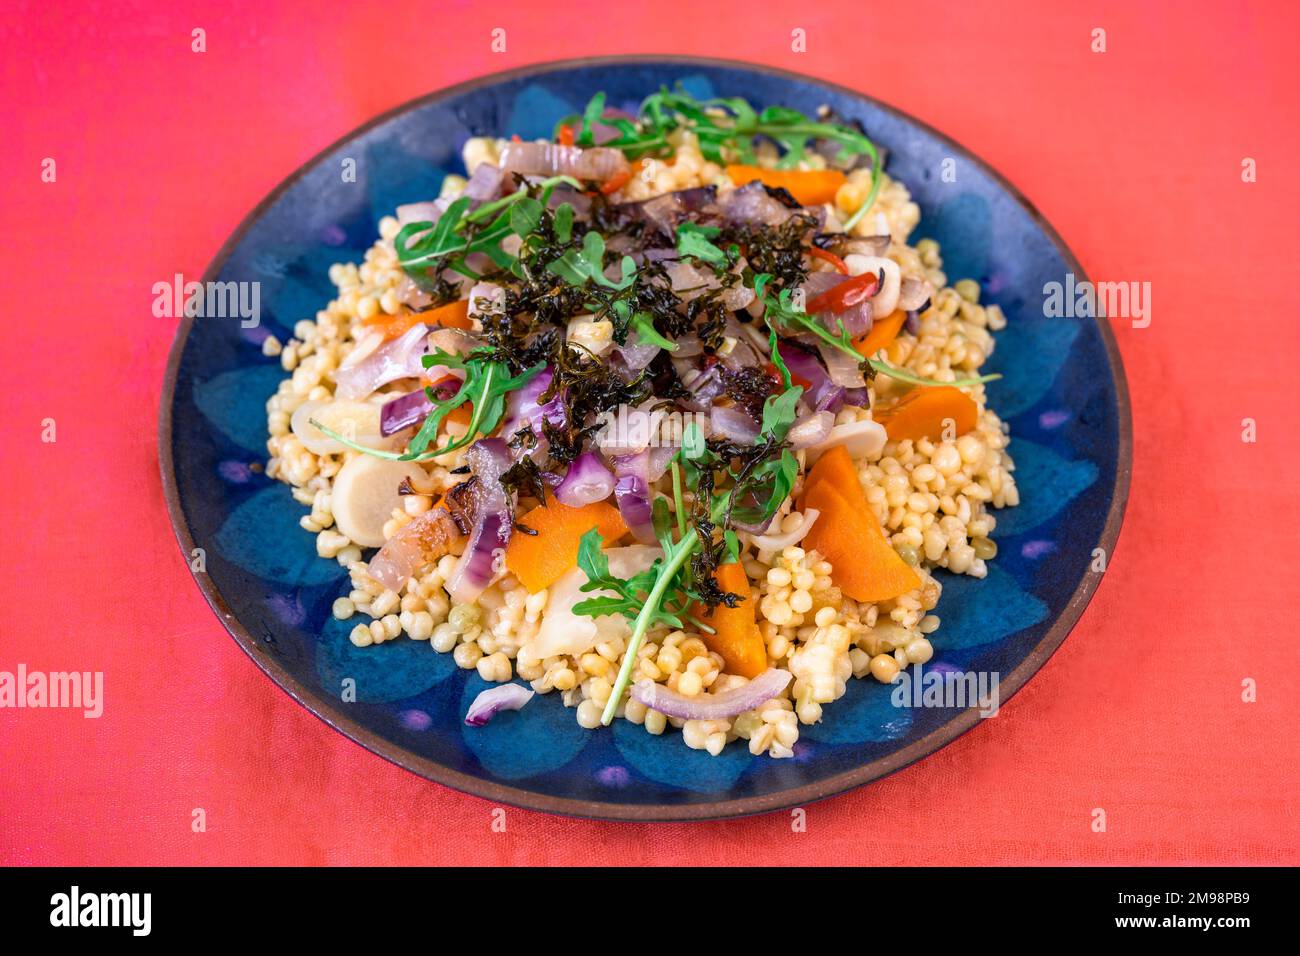 Boiled pasta tarhona (type of european pasta) with vegetable and rucola on blue plate, on red background. Vegetarian meal. Stock Photo